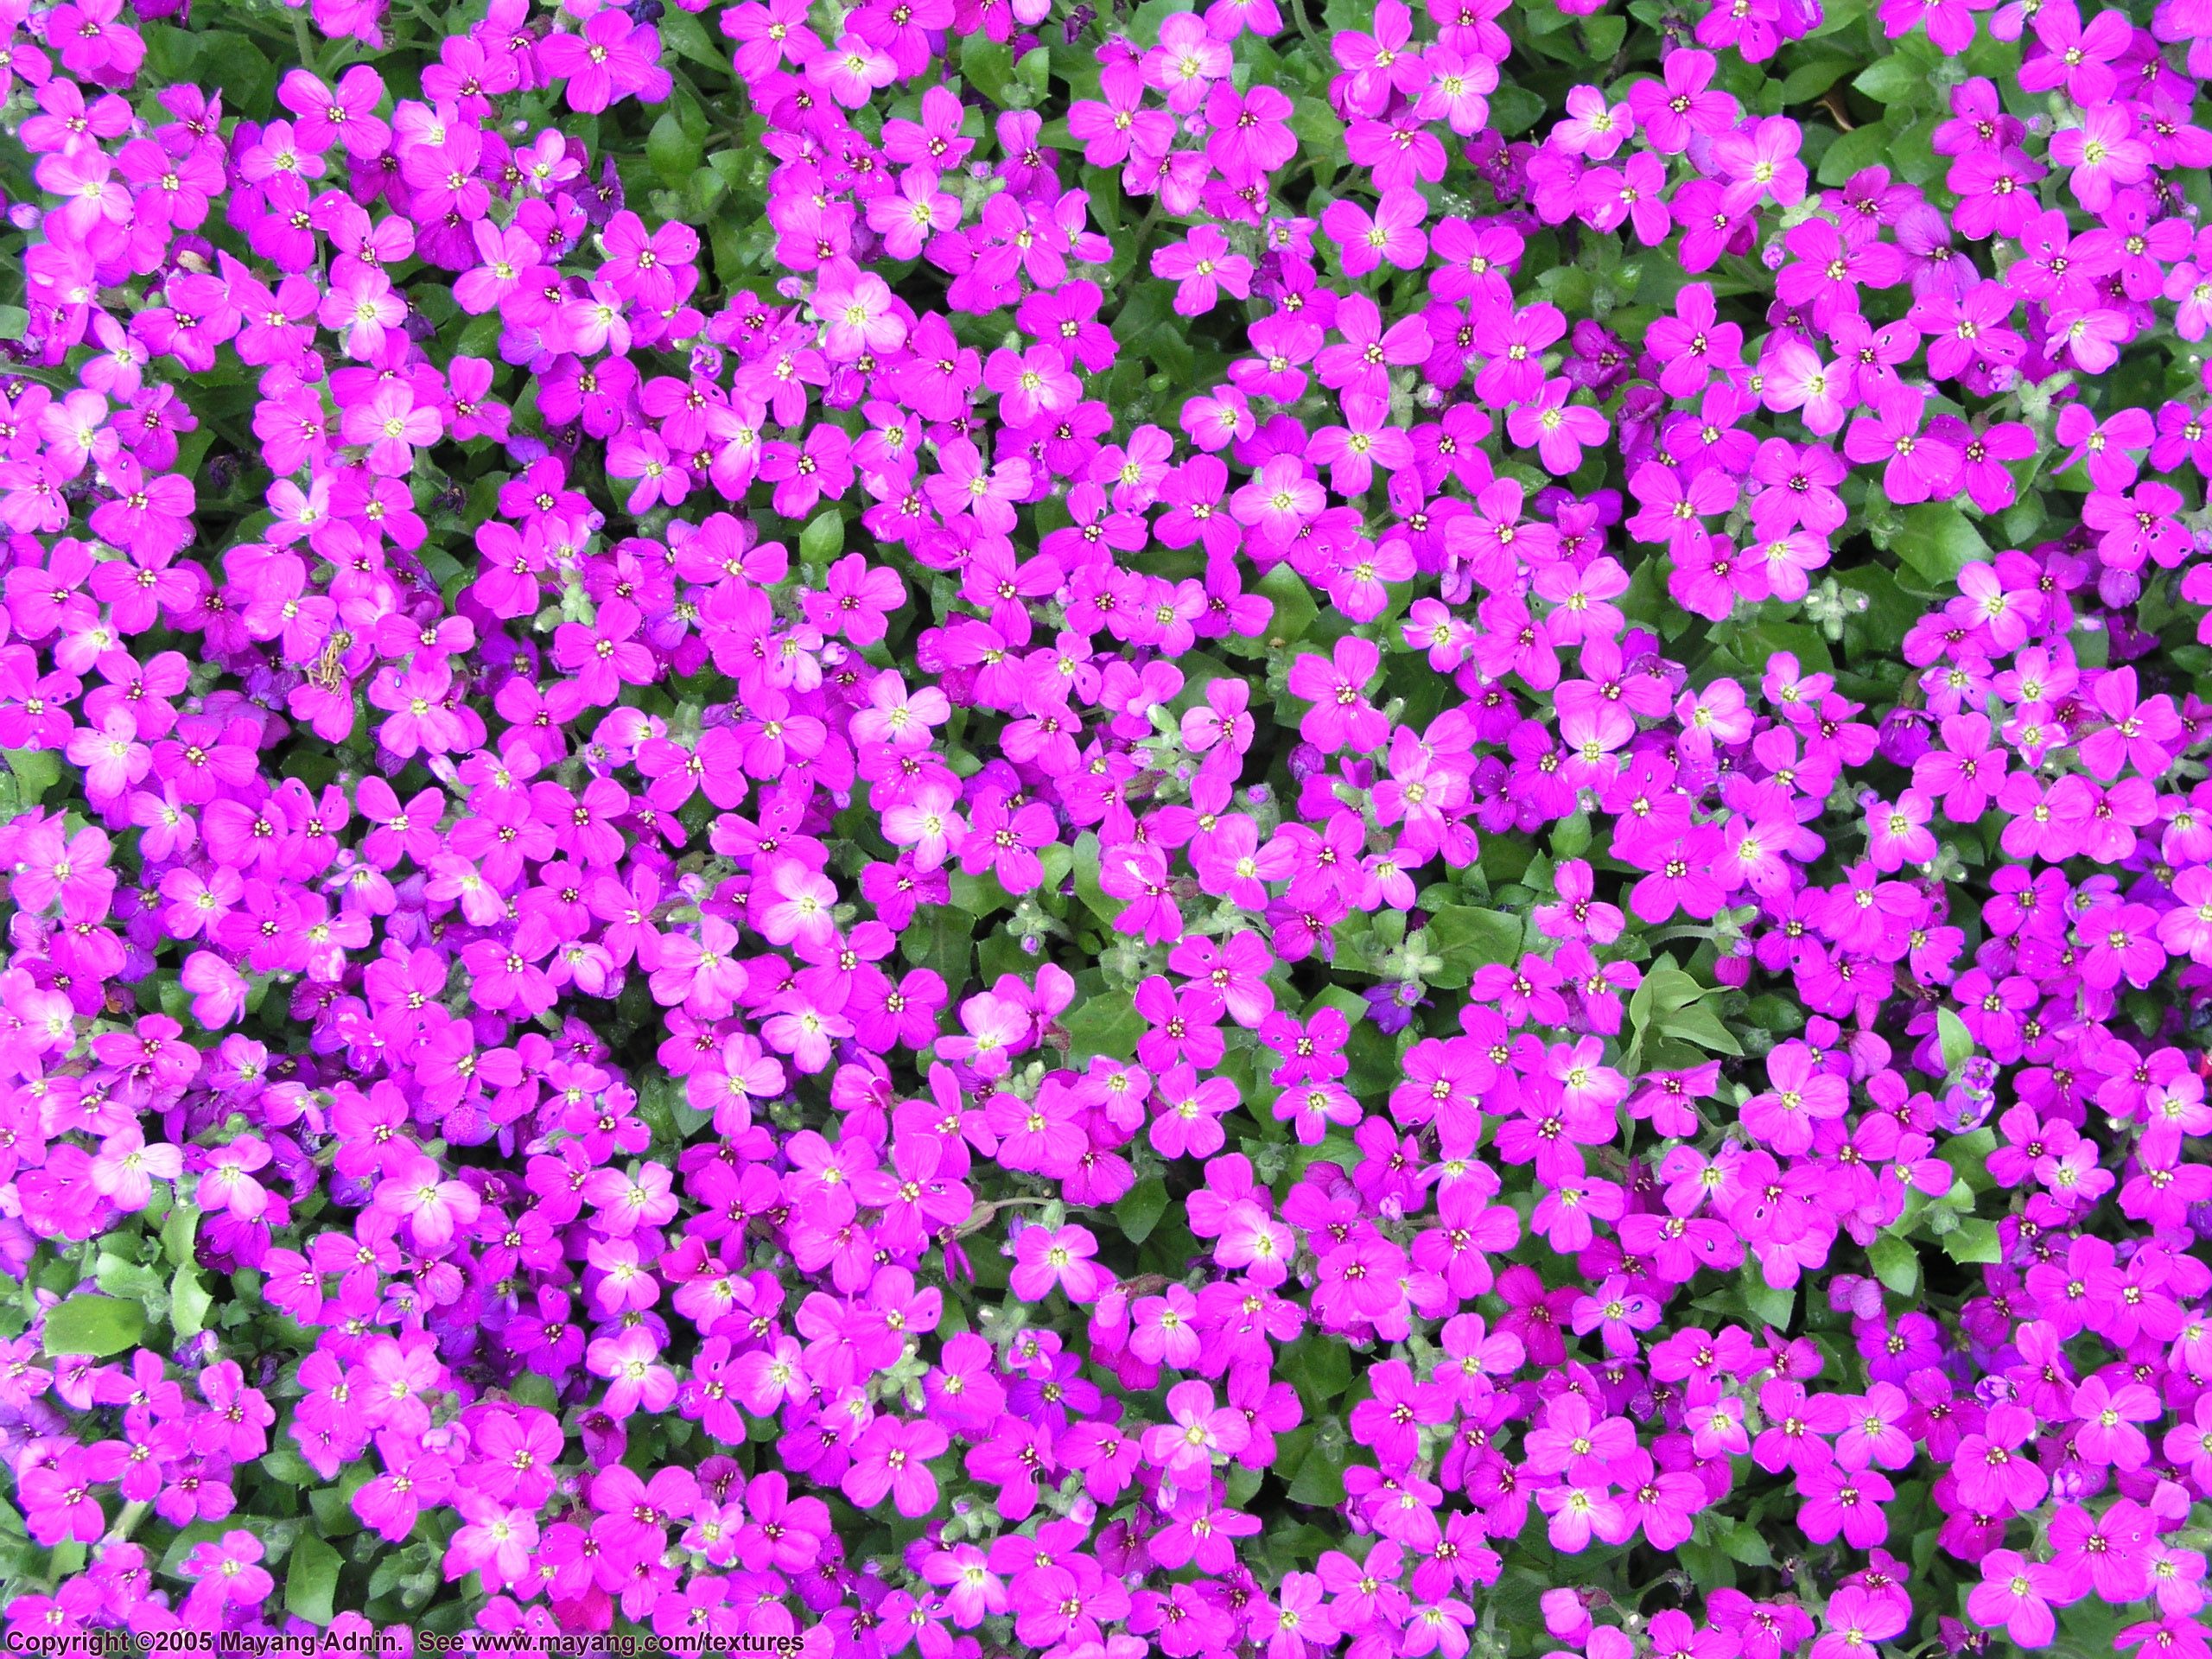 high quality picture of flower desktop for pc | glass | Pinterest ...